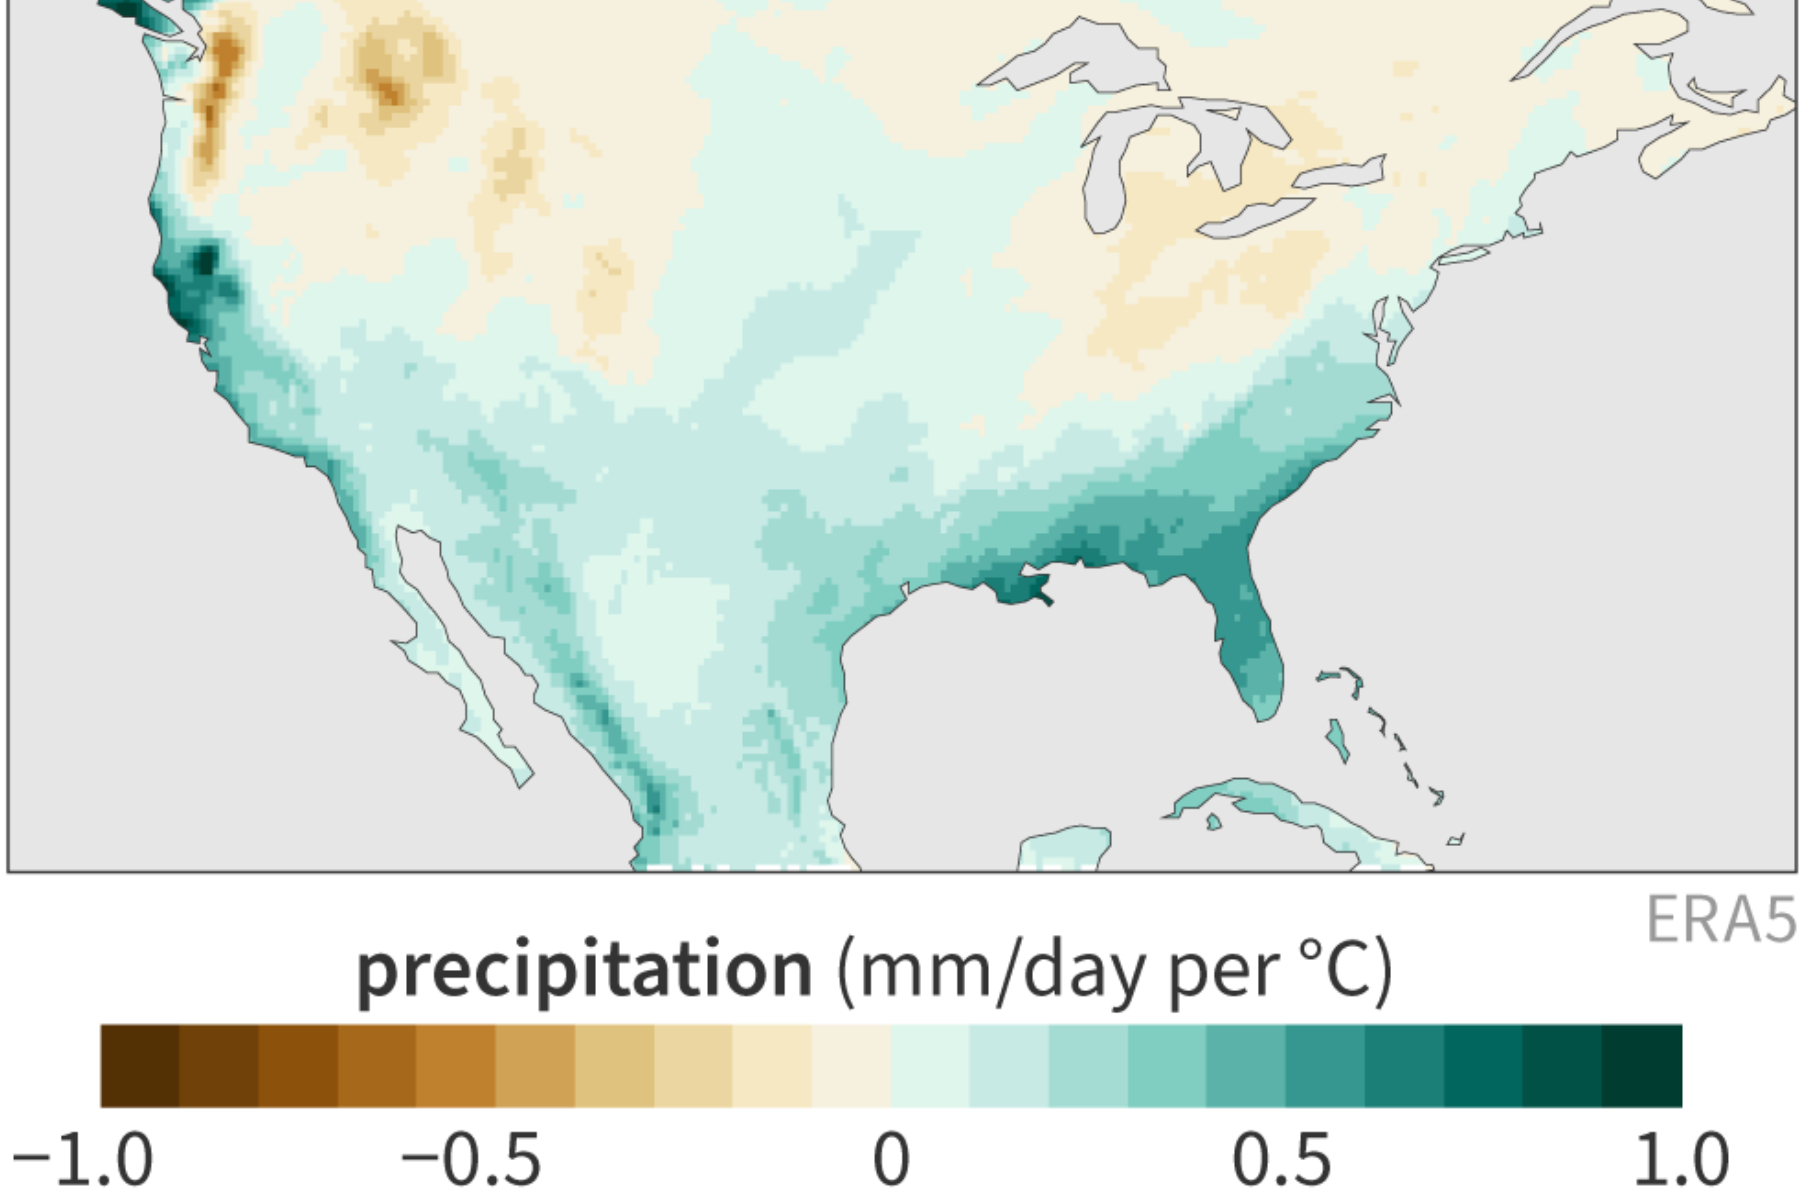 NOAA Maps Reveal How El Niño Will Impact US Rain and Snow This Winter